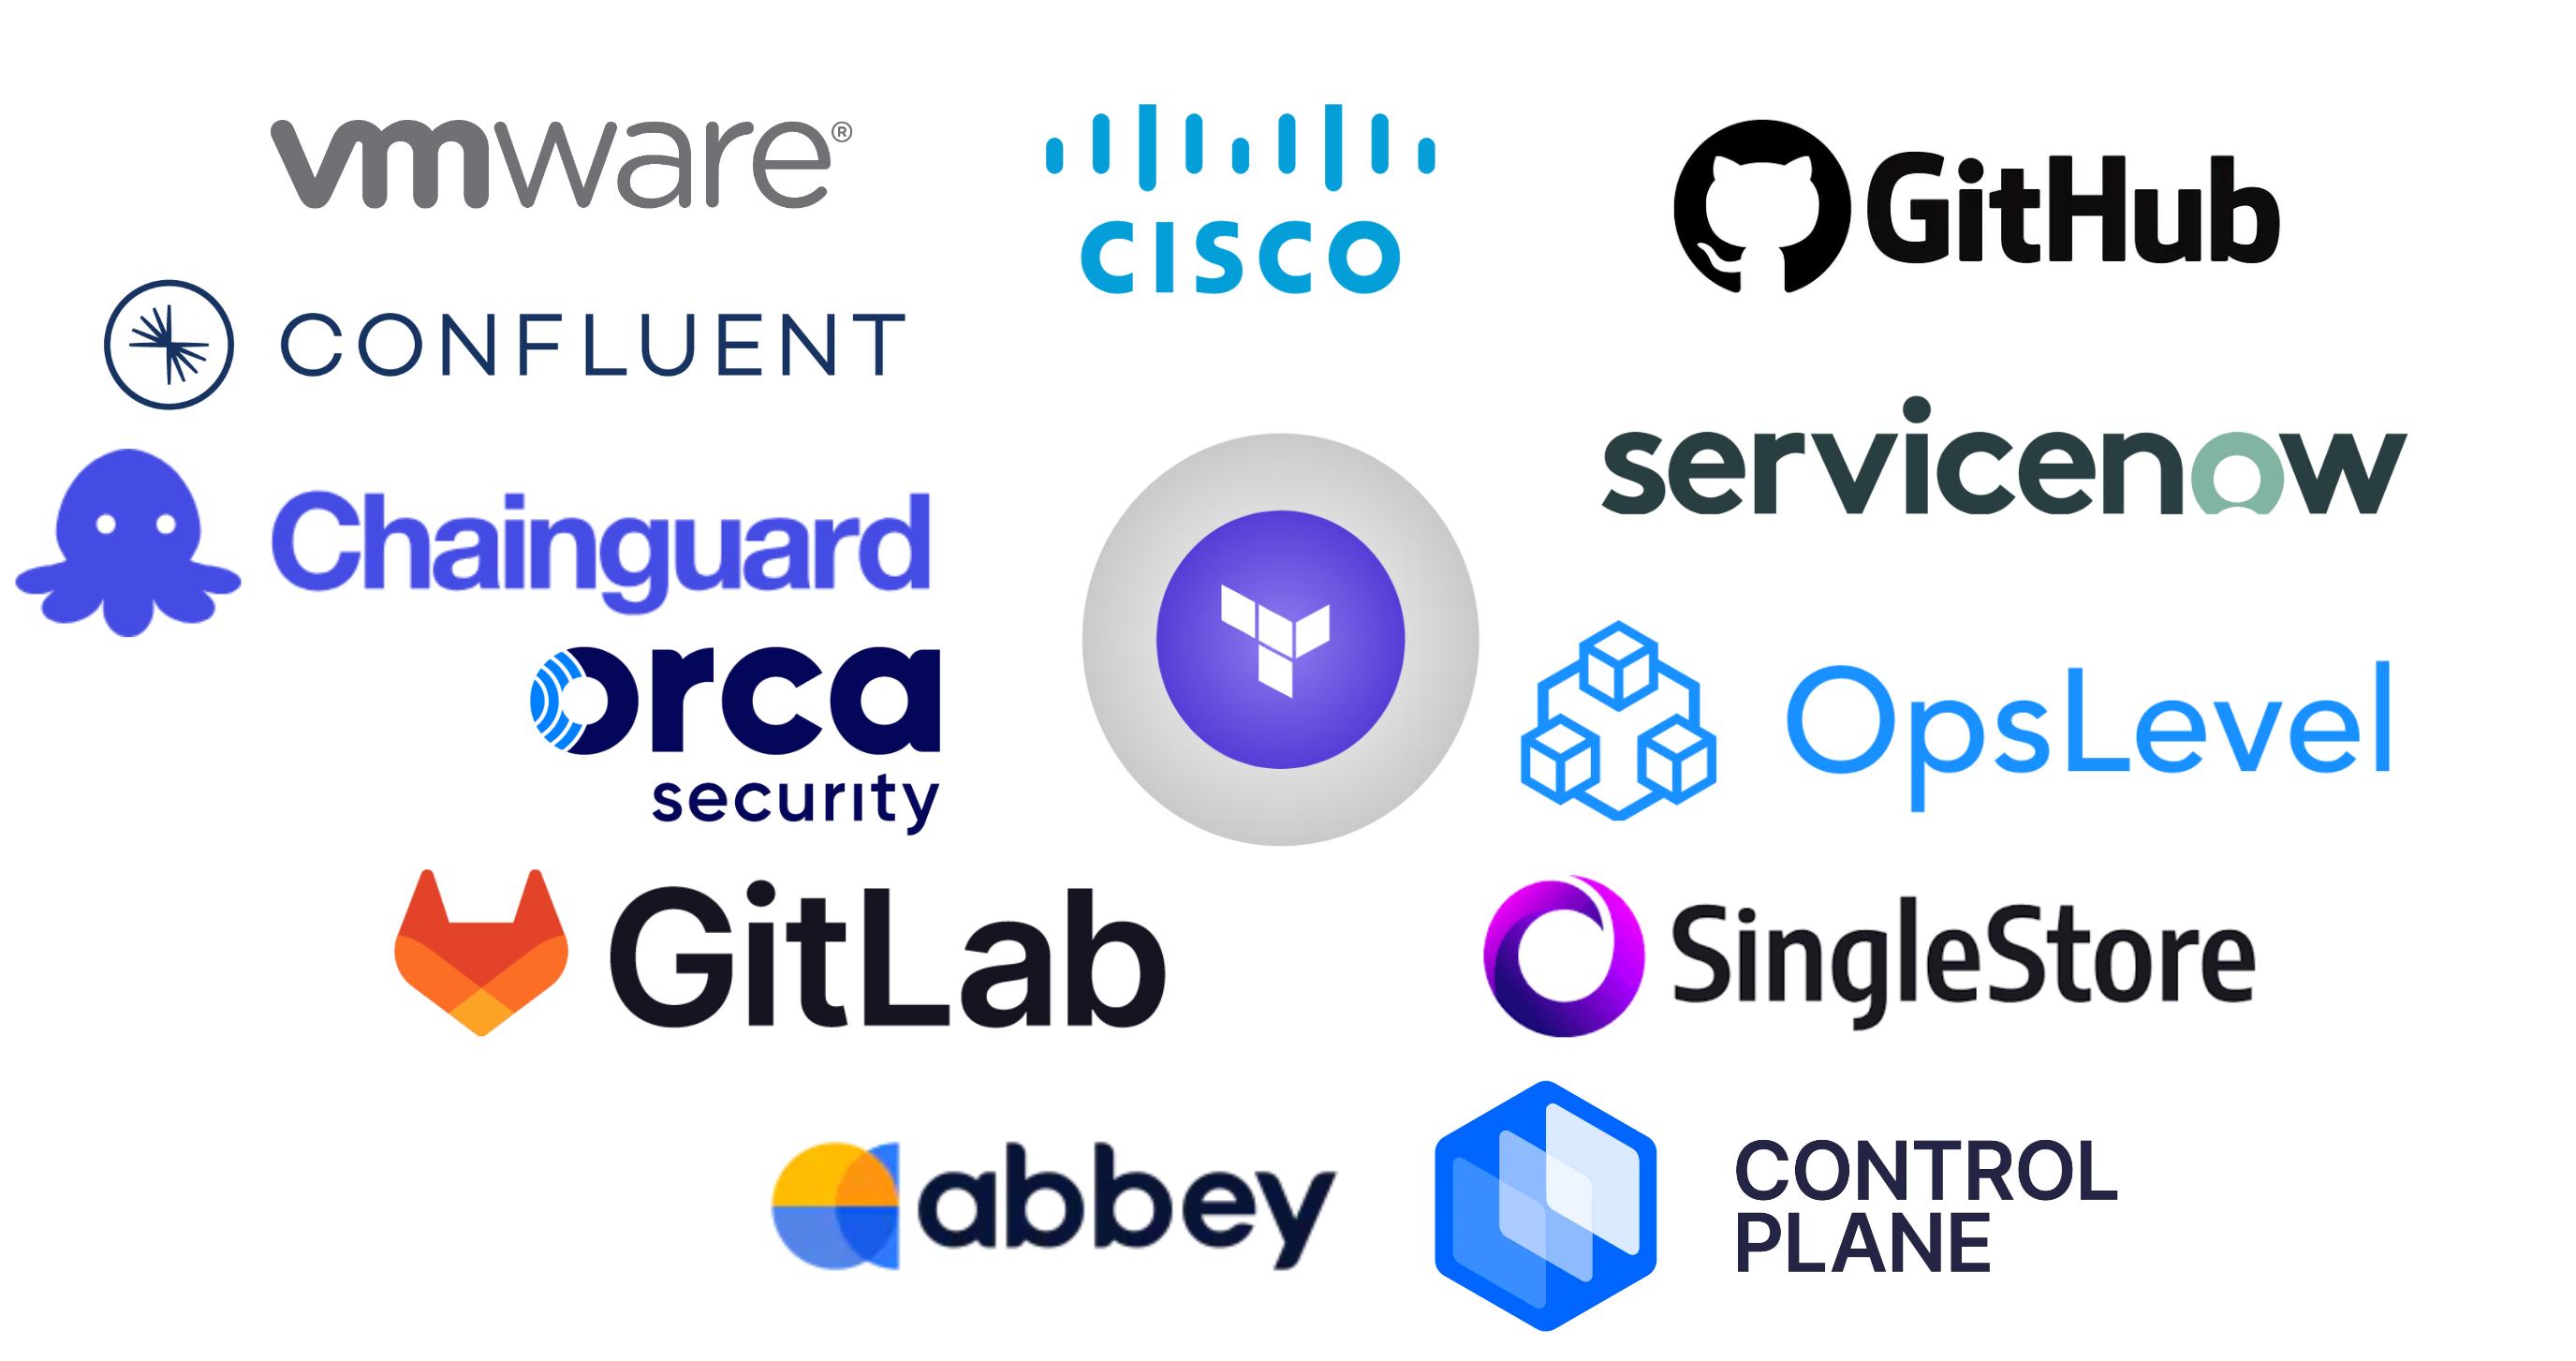 New Terraform integrations with ServiceNow, GitHub, Confluent, VMware, Cisco, and more